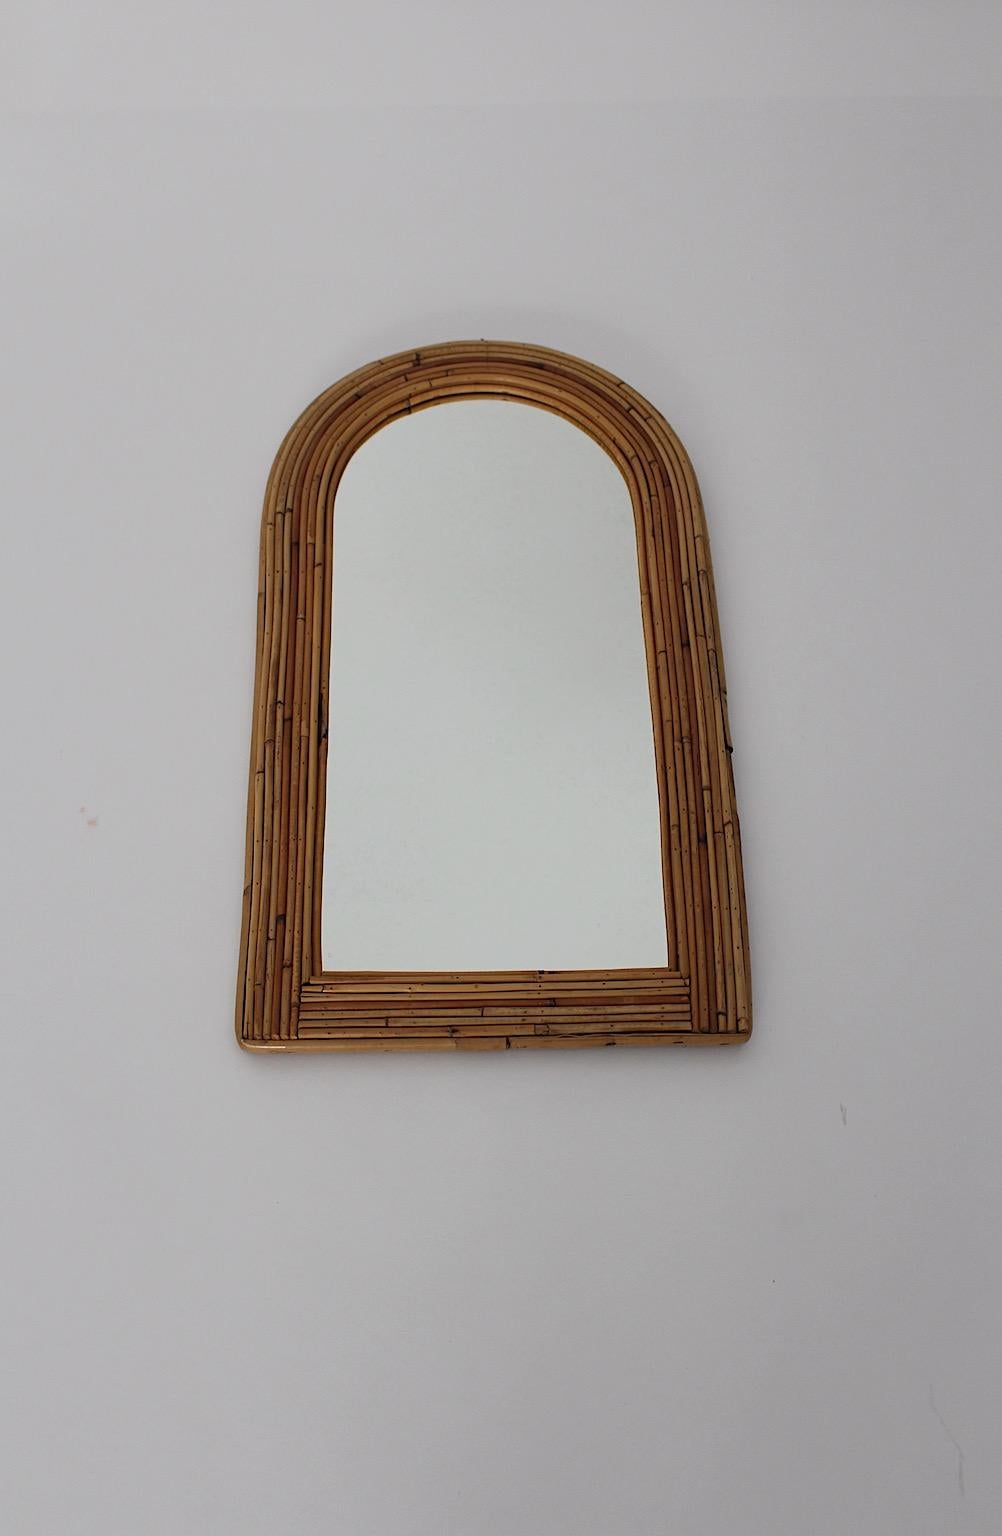 20th Century Bamboo Rattan Mid Century Modern Vintage Wall Mirror 1970s France For Sale